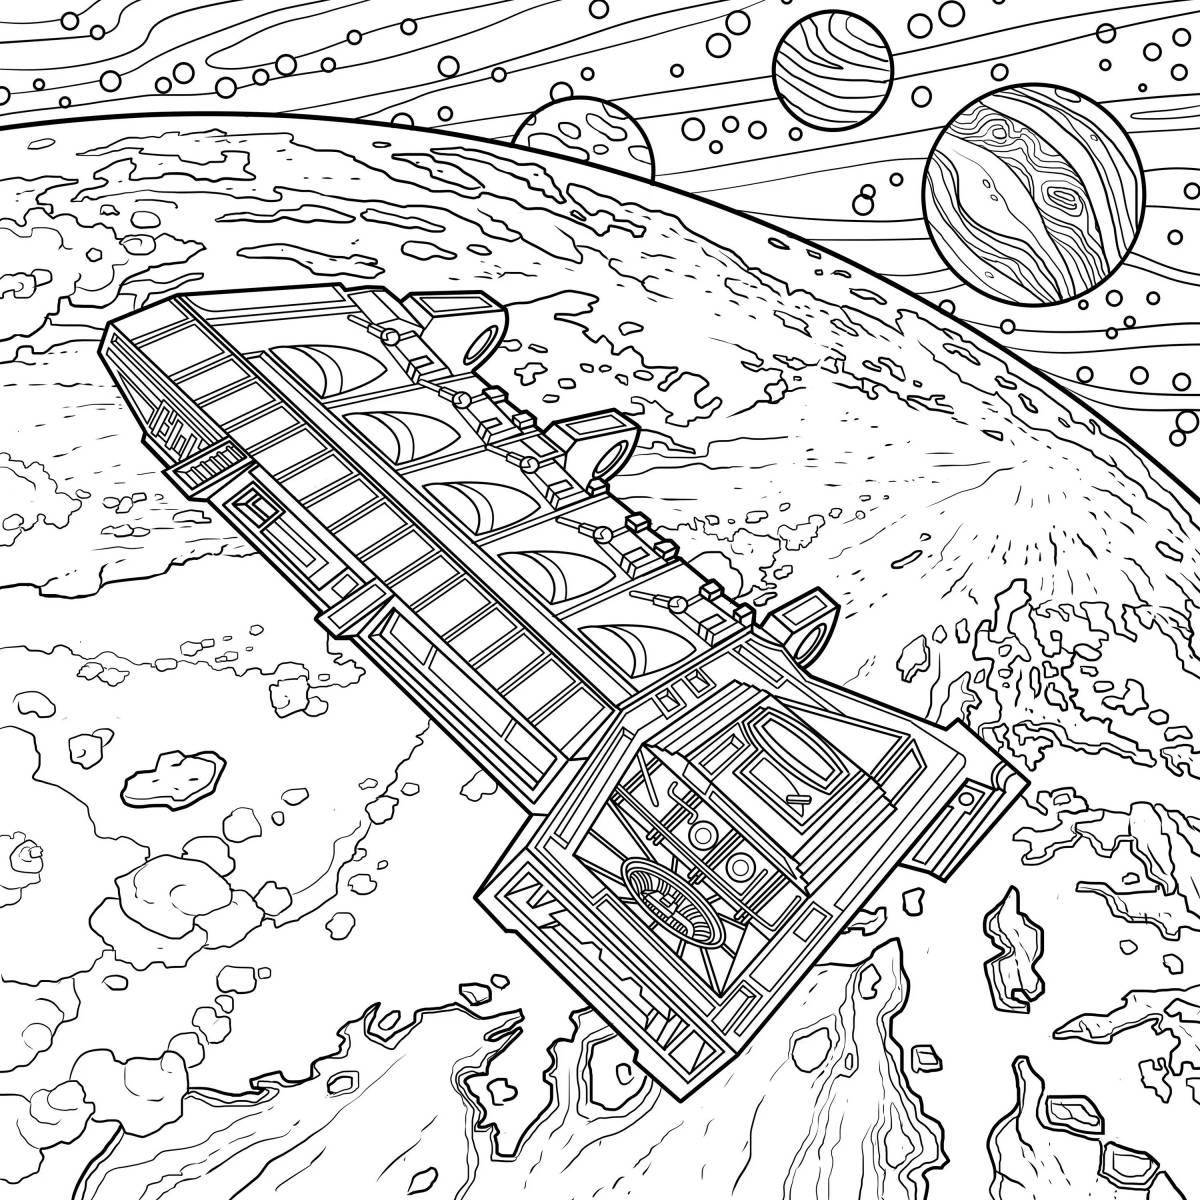 Coloring book shiny space complex